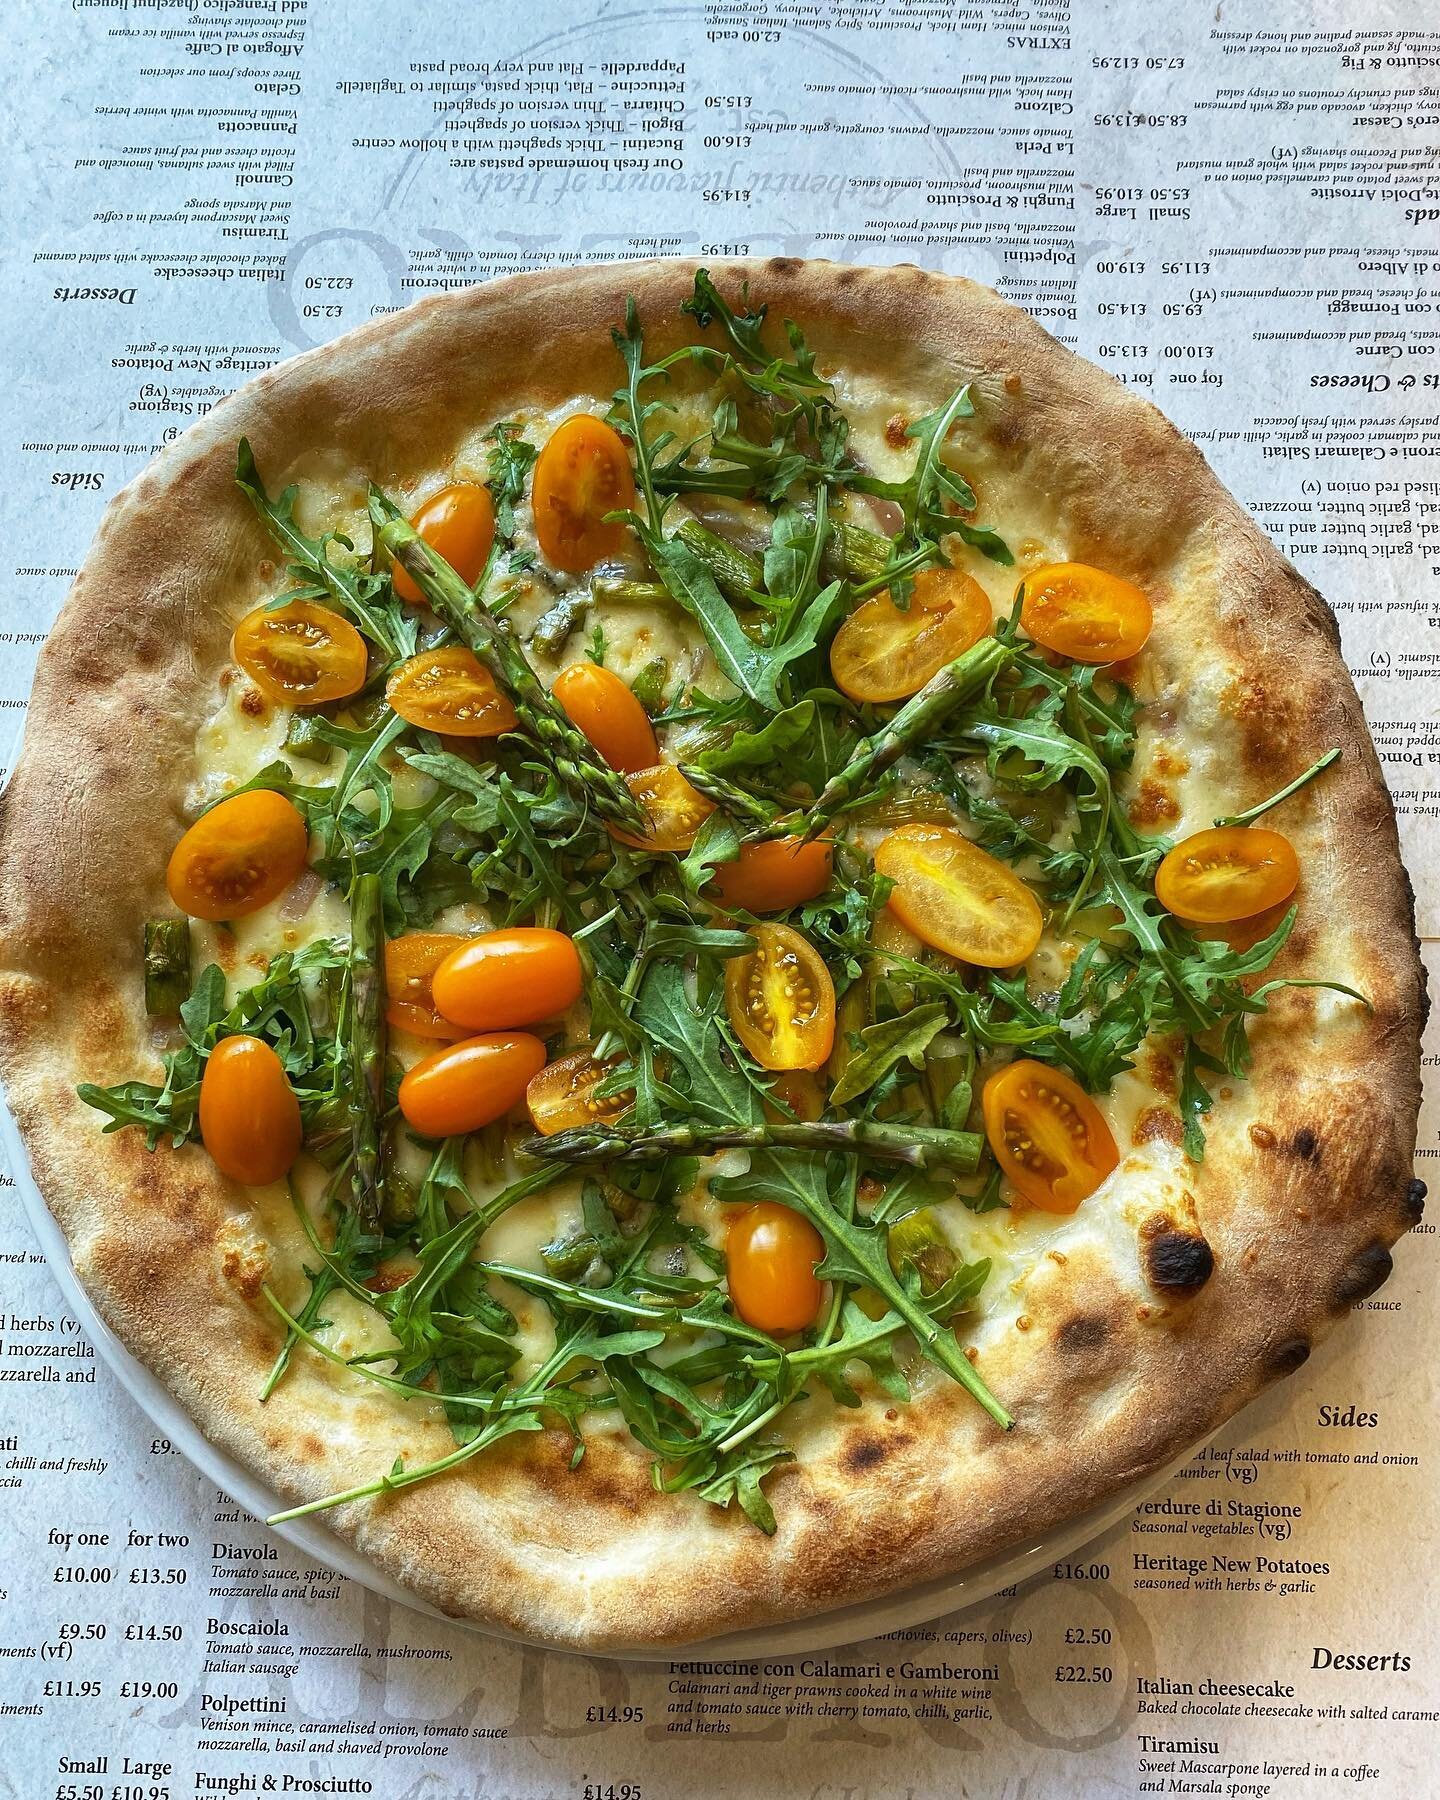 Our pizza of the week is a sunshine on the plate ☀️ 🍕 well needed today 😅
We hope you are all enjoying this long weekend 

#maybankholiday #longweekend #longweekendvibes #authenticitalian #italianrestaurant #newforest #brockenhurst @albero_brockenh